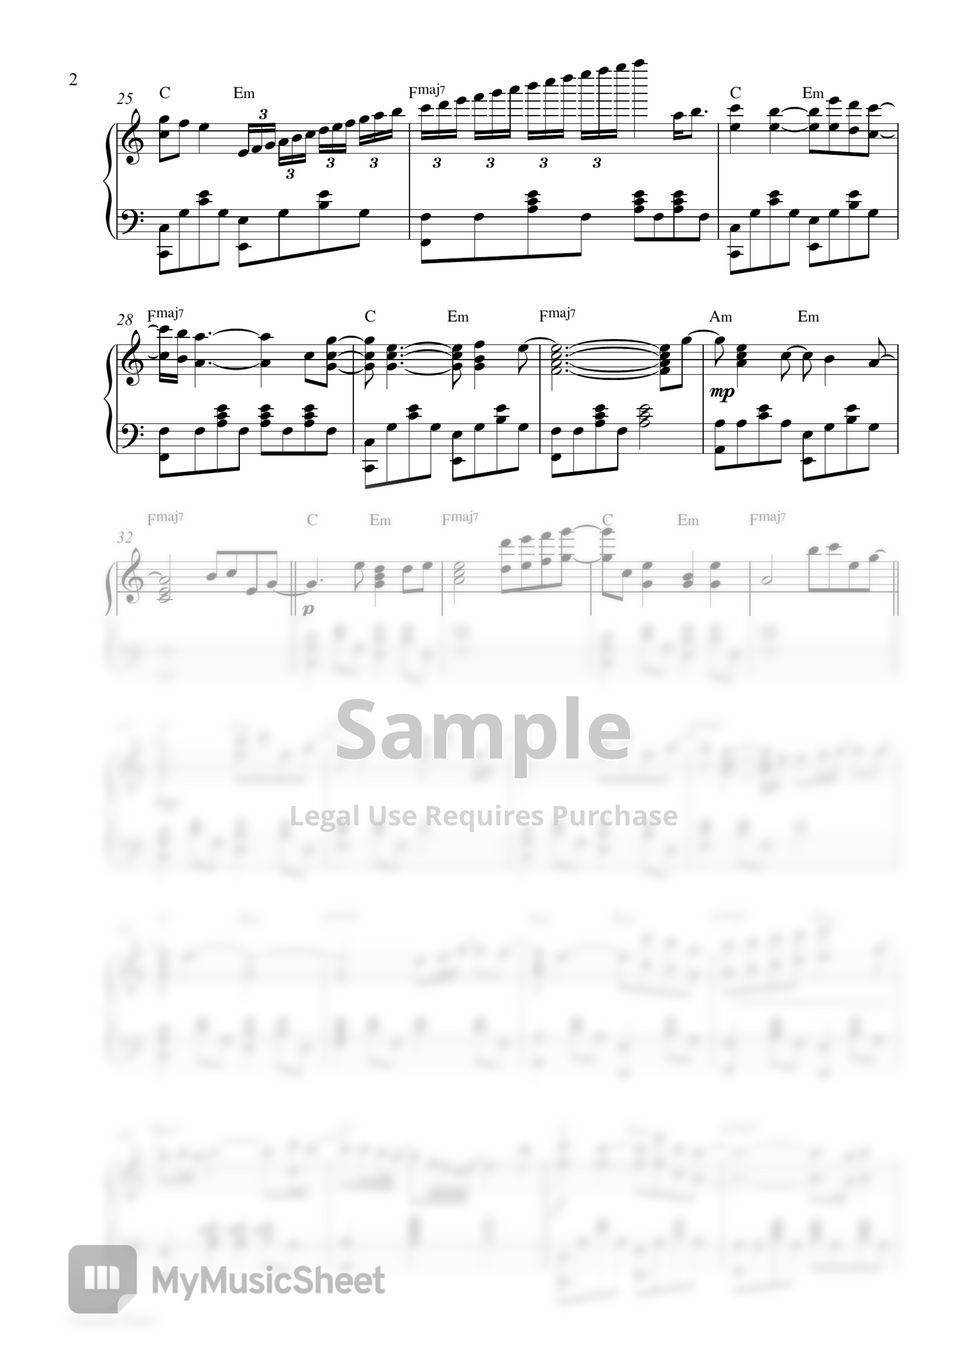 Billie Eilish - What Was I Made For? (Piano Sheet - Special Price $2) by Pianella Piano